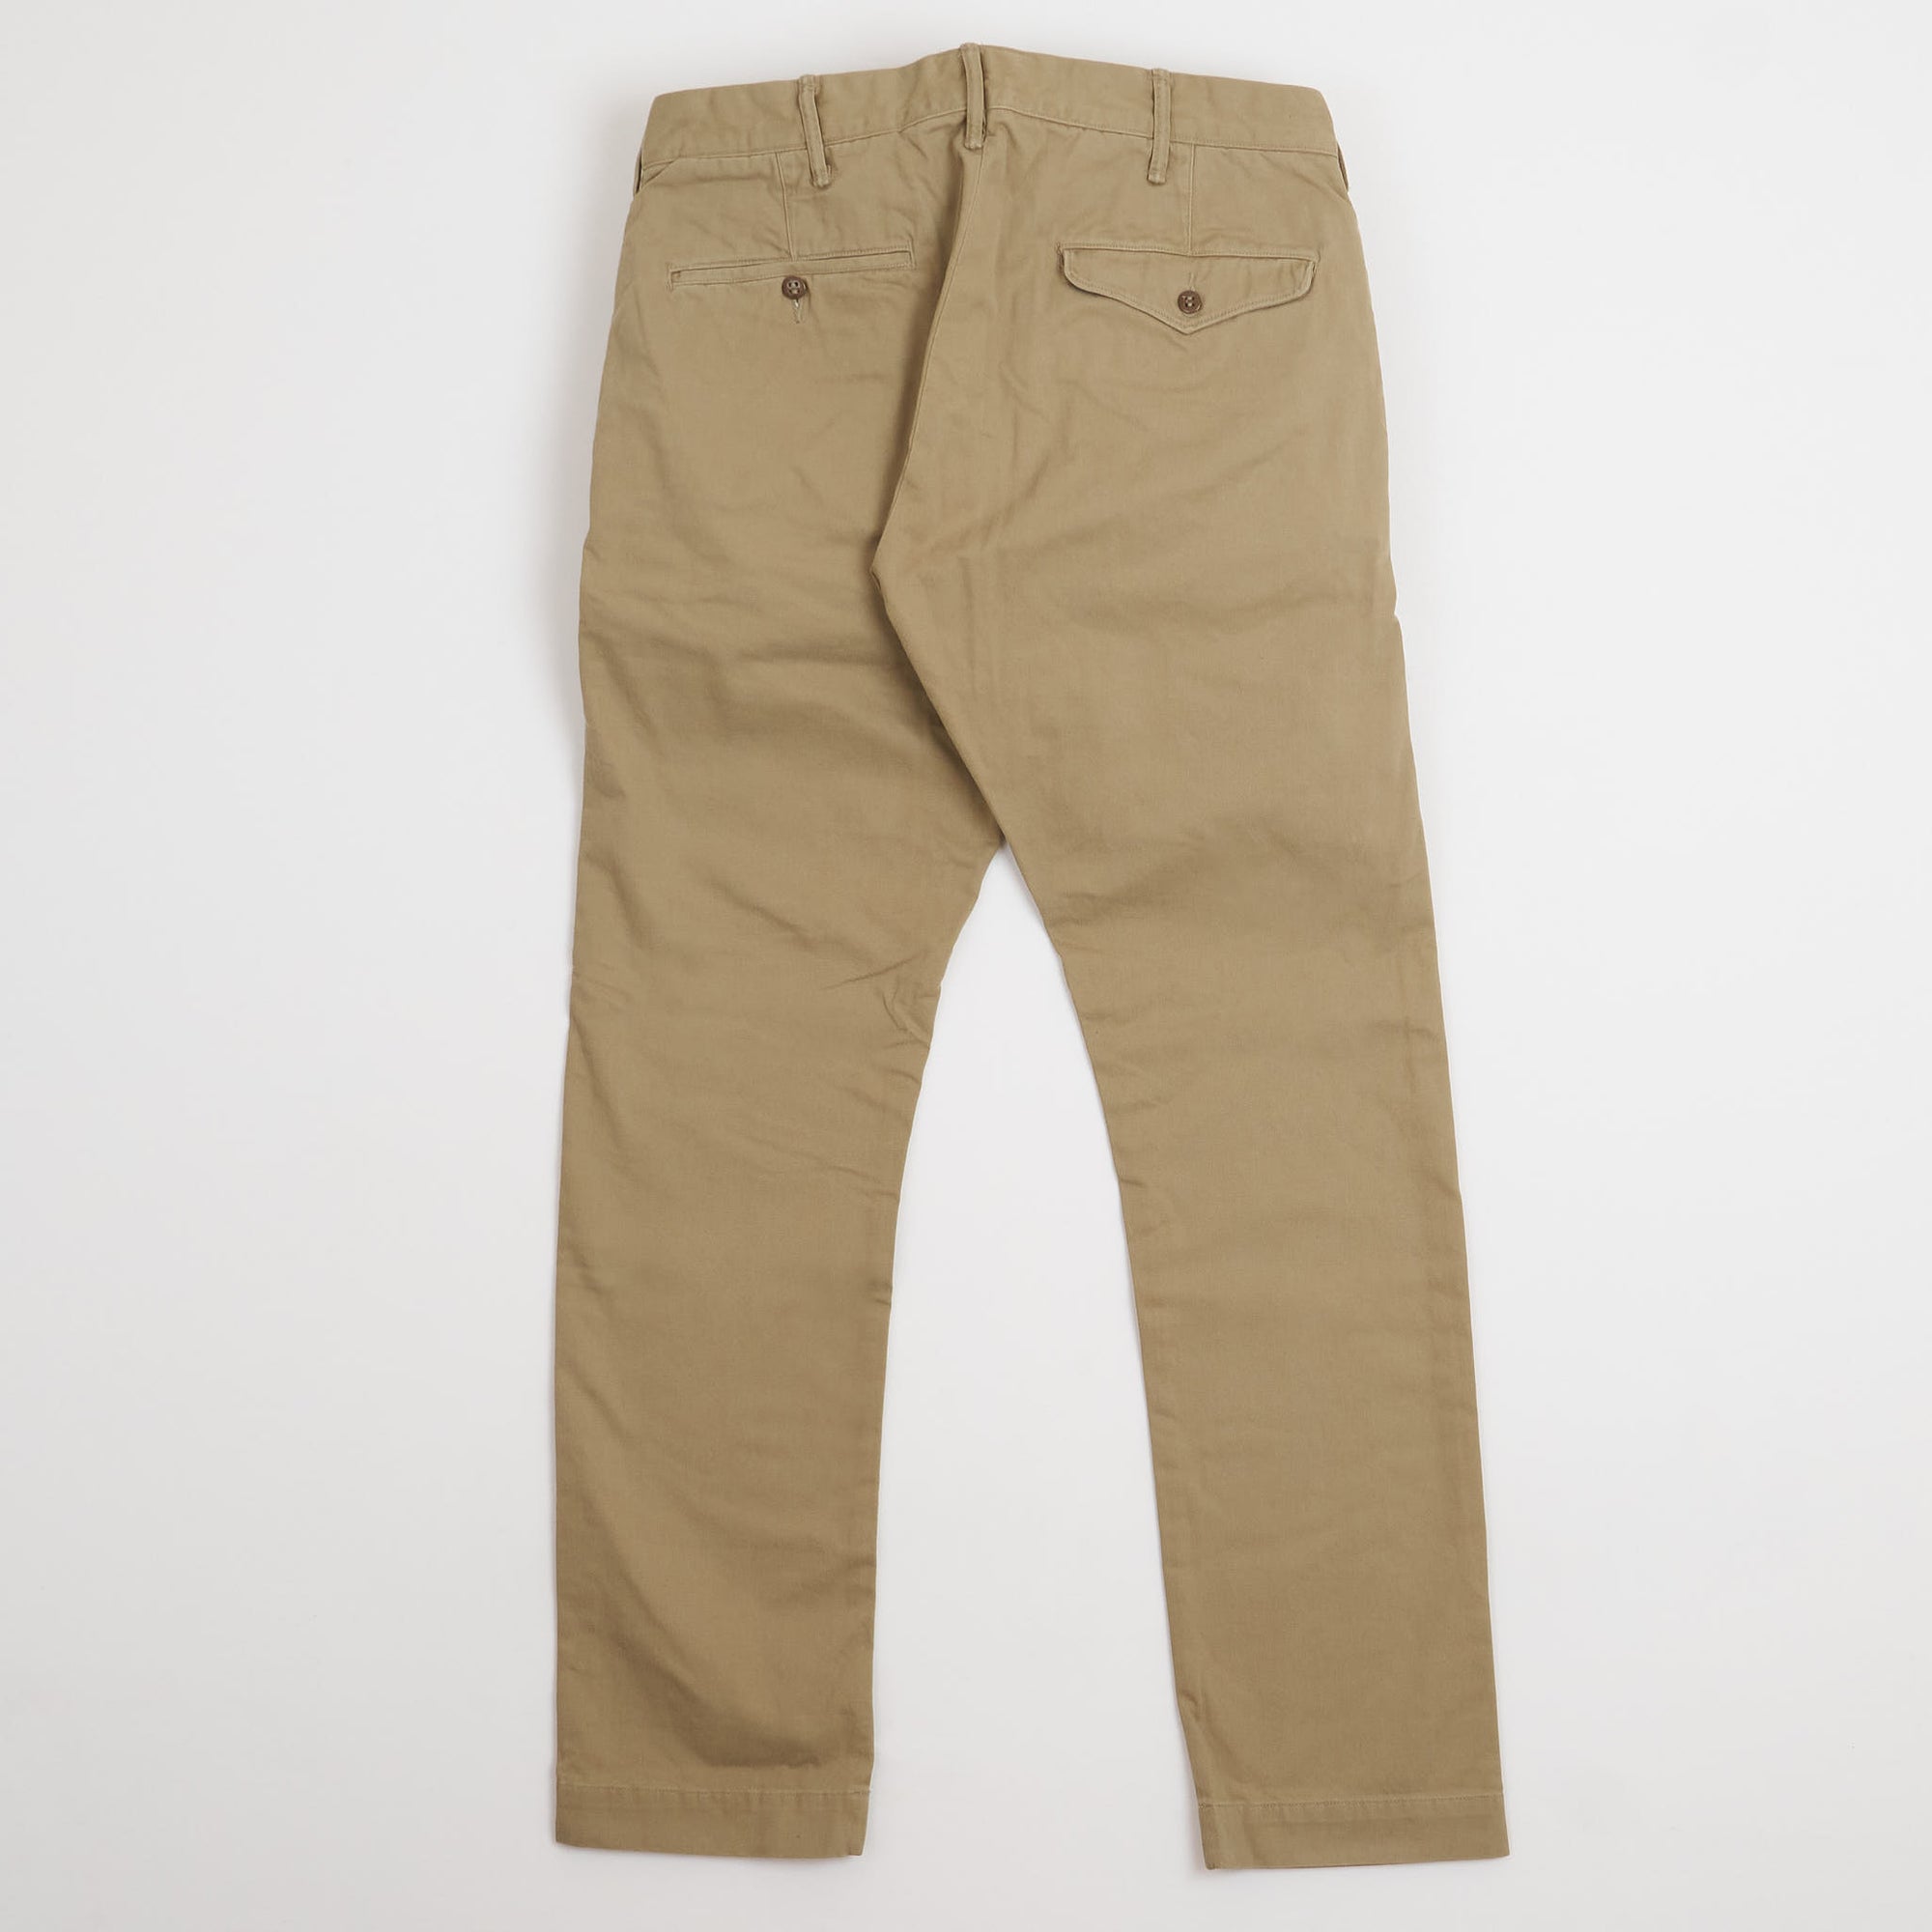 Double RL Officers Classic Chinos Regular - DeeCee style